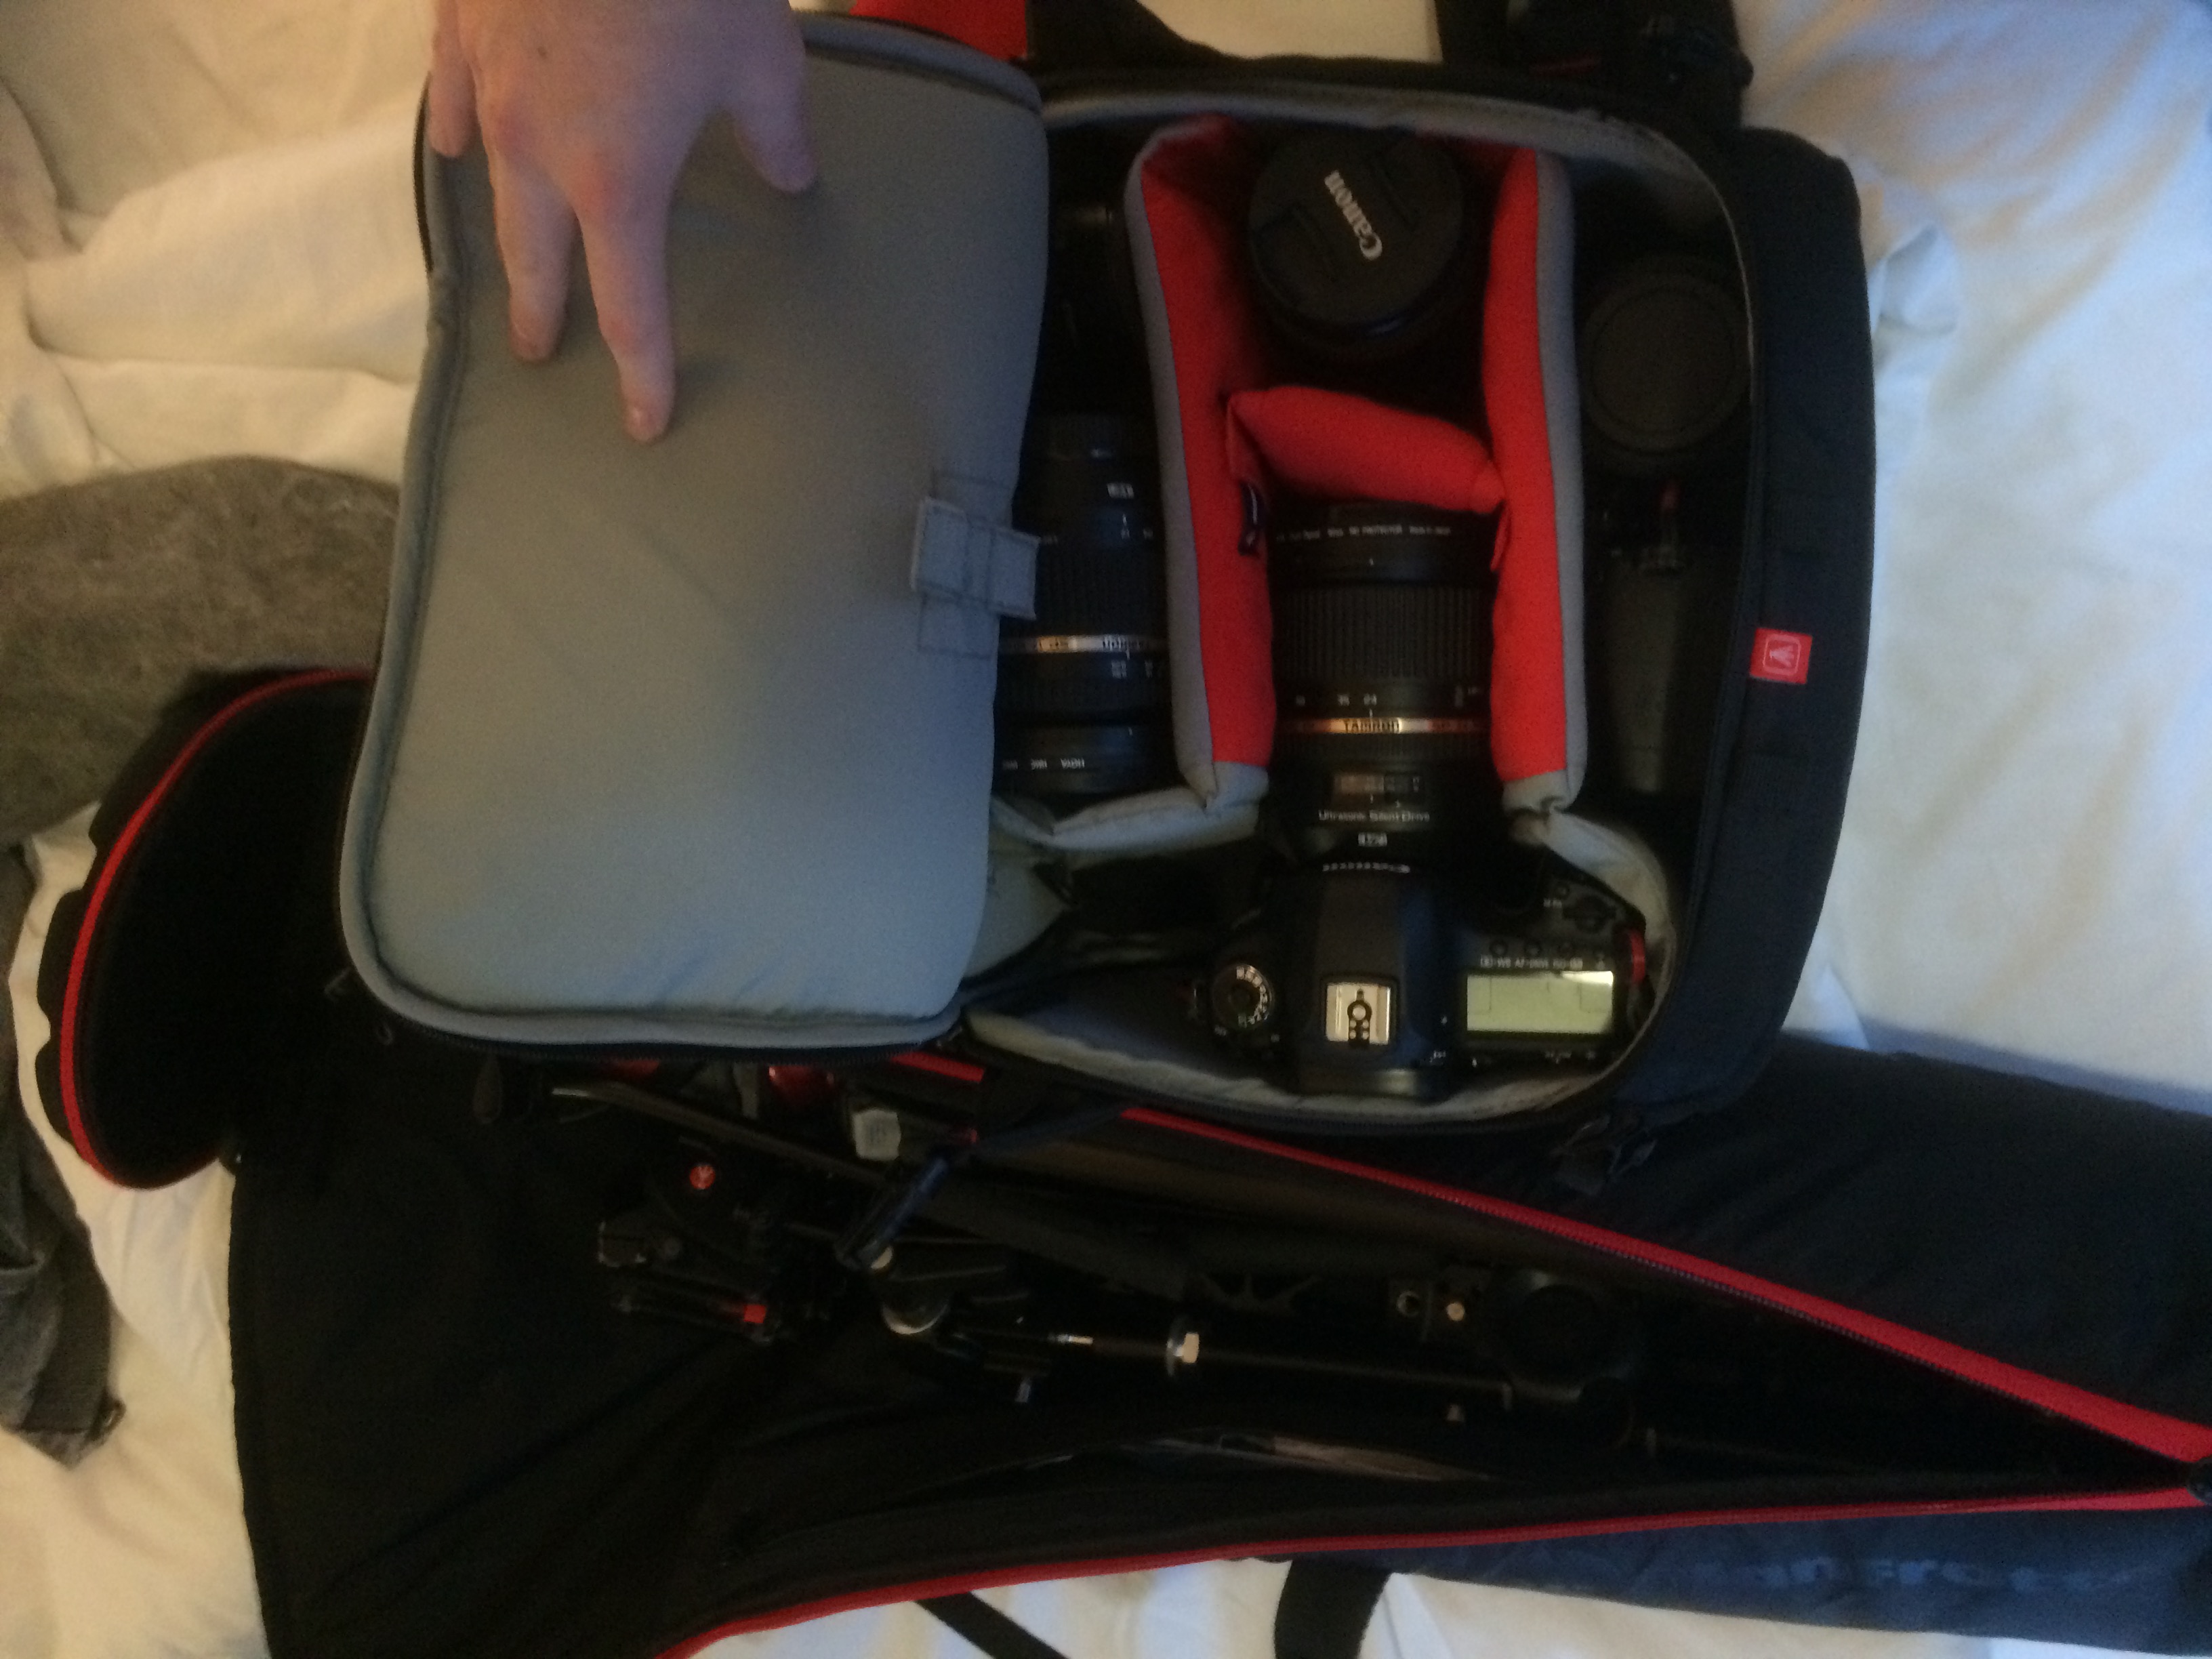 Major Manfrotto fest at BVE - all my gear is Manfrotto!